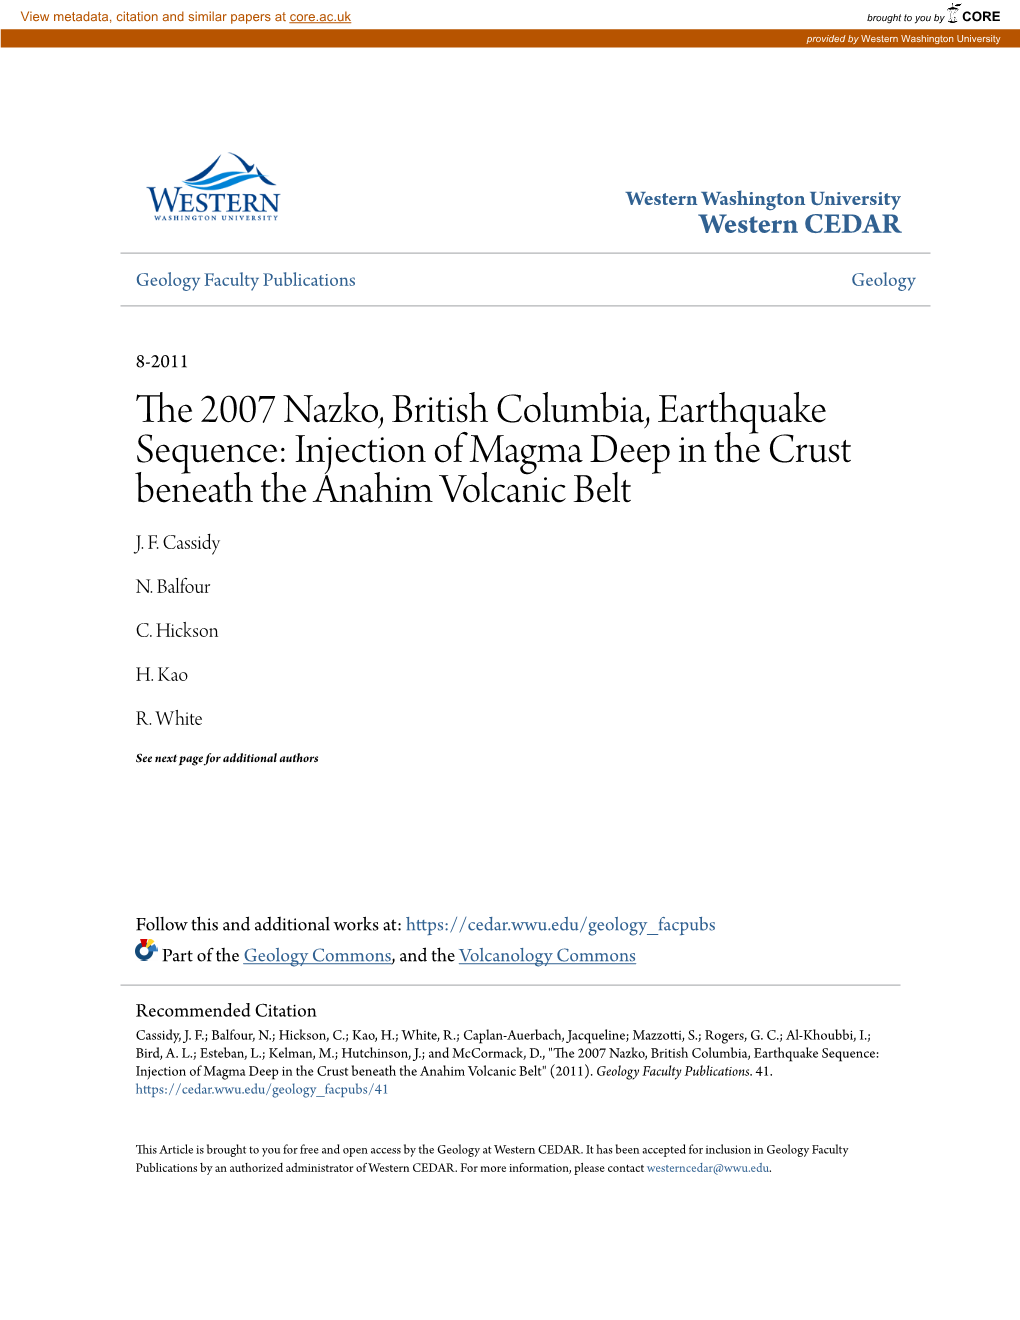 The 2007 Nazko, British Columbia, Earthquake Sequence: Injection of Magma Deep in the Crust Beneath the Anahim Volcanic Belt by J